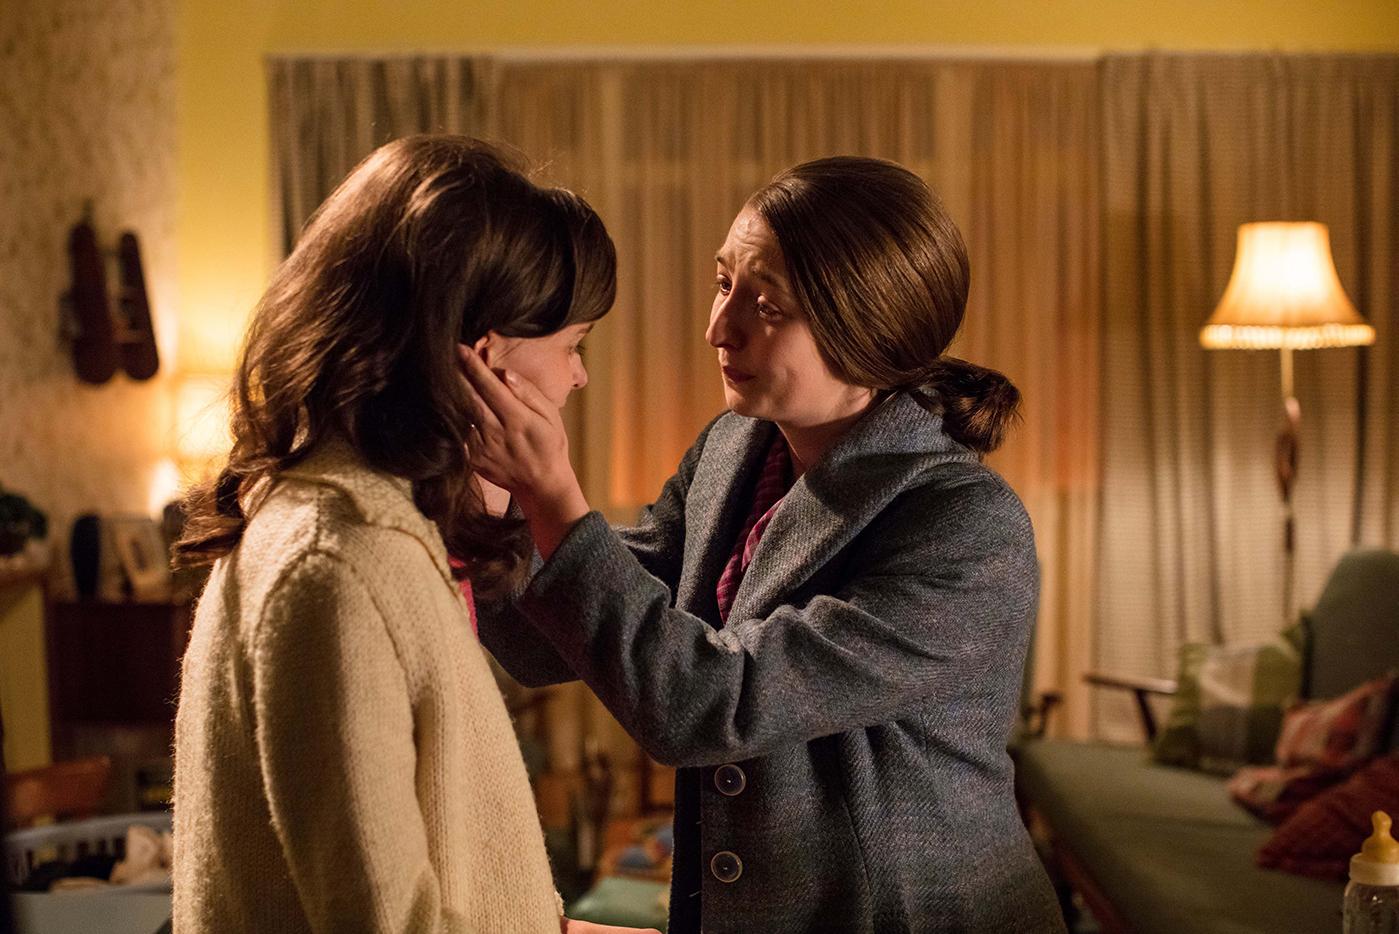 Cath and Lesley in Call the Midwife. Photo: BBC/Neal Street Productions